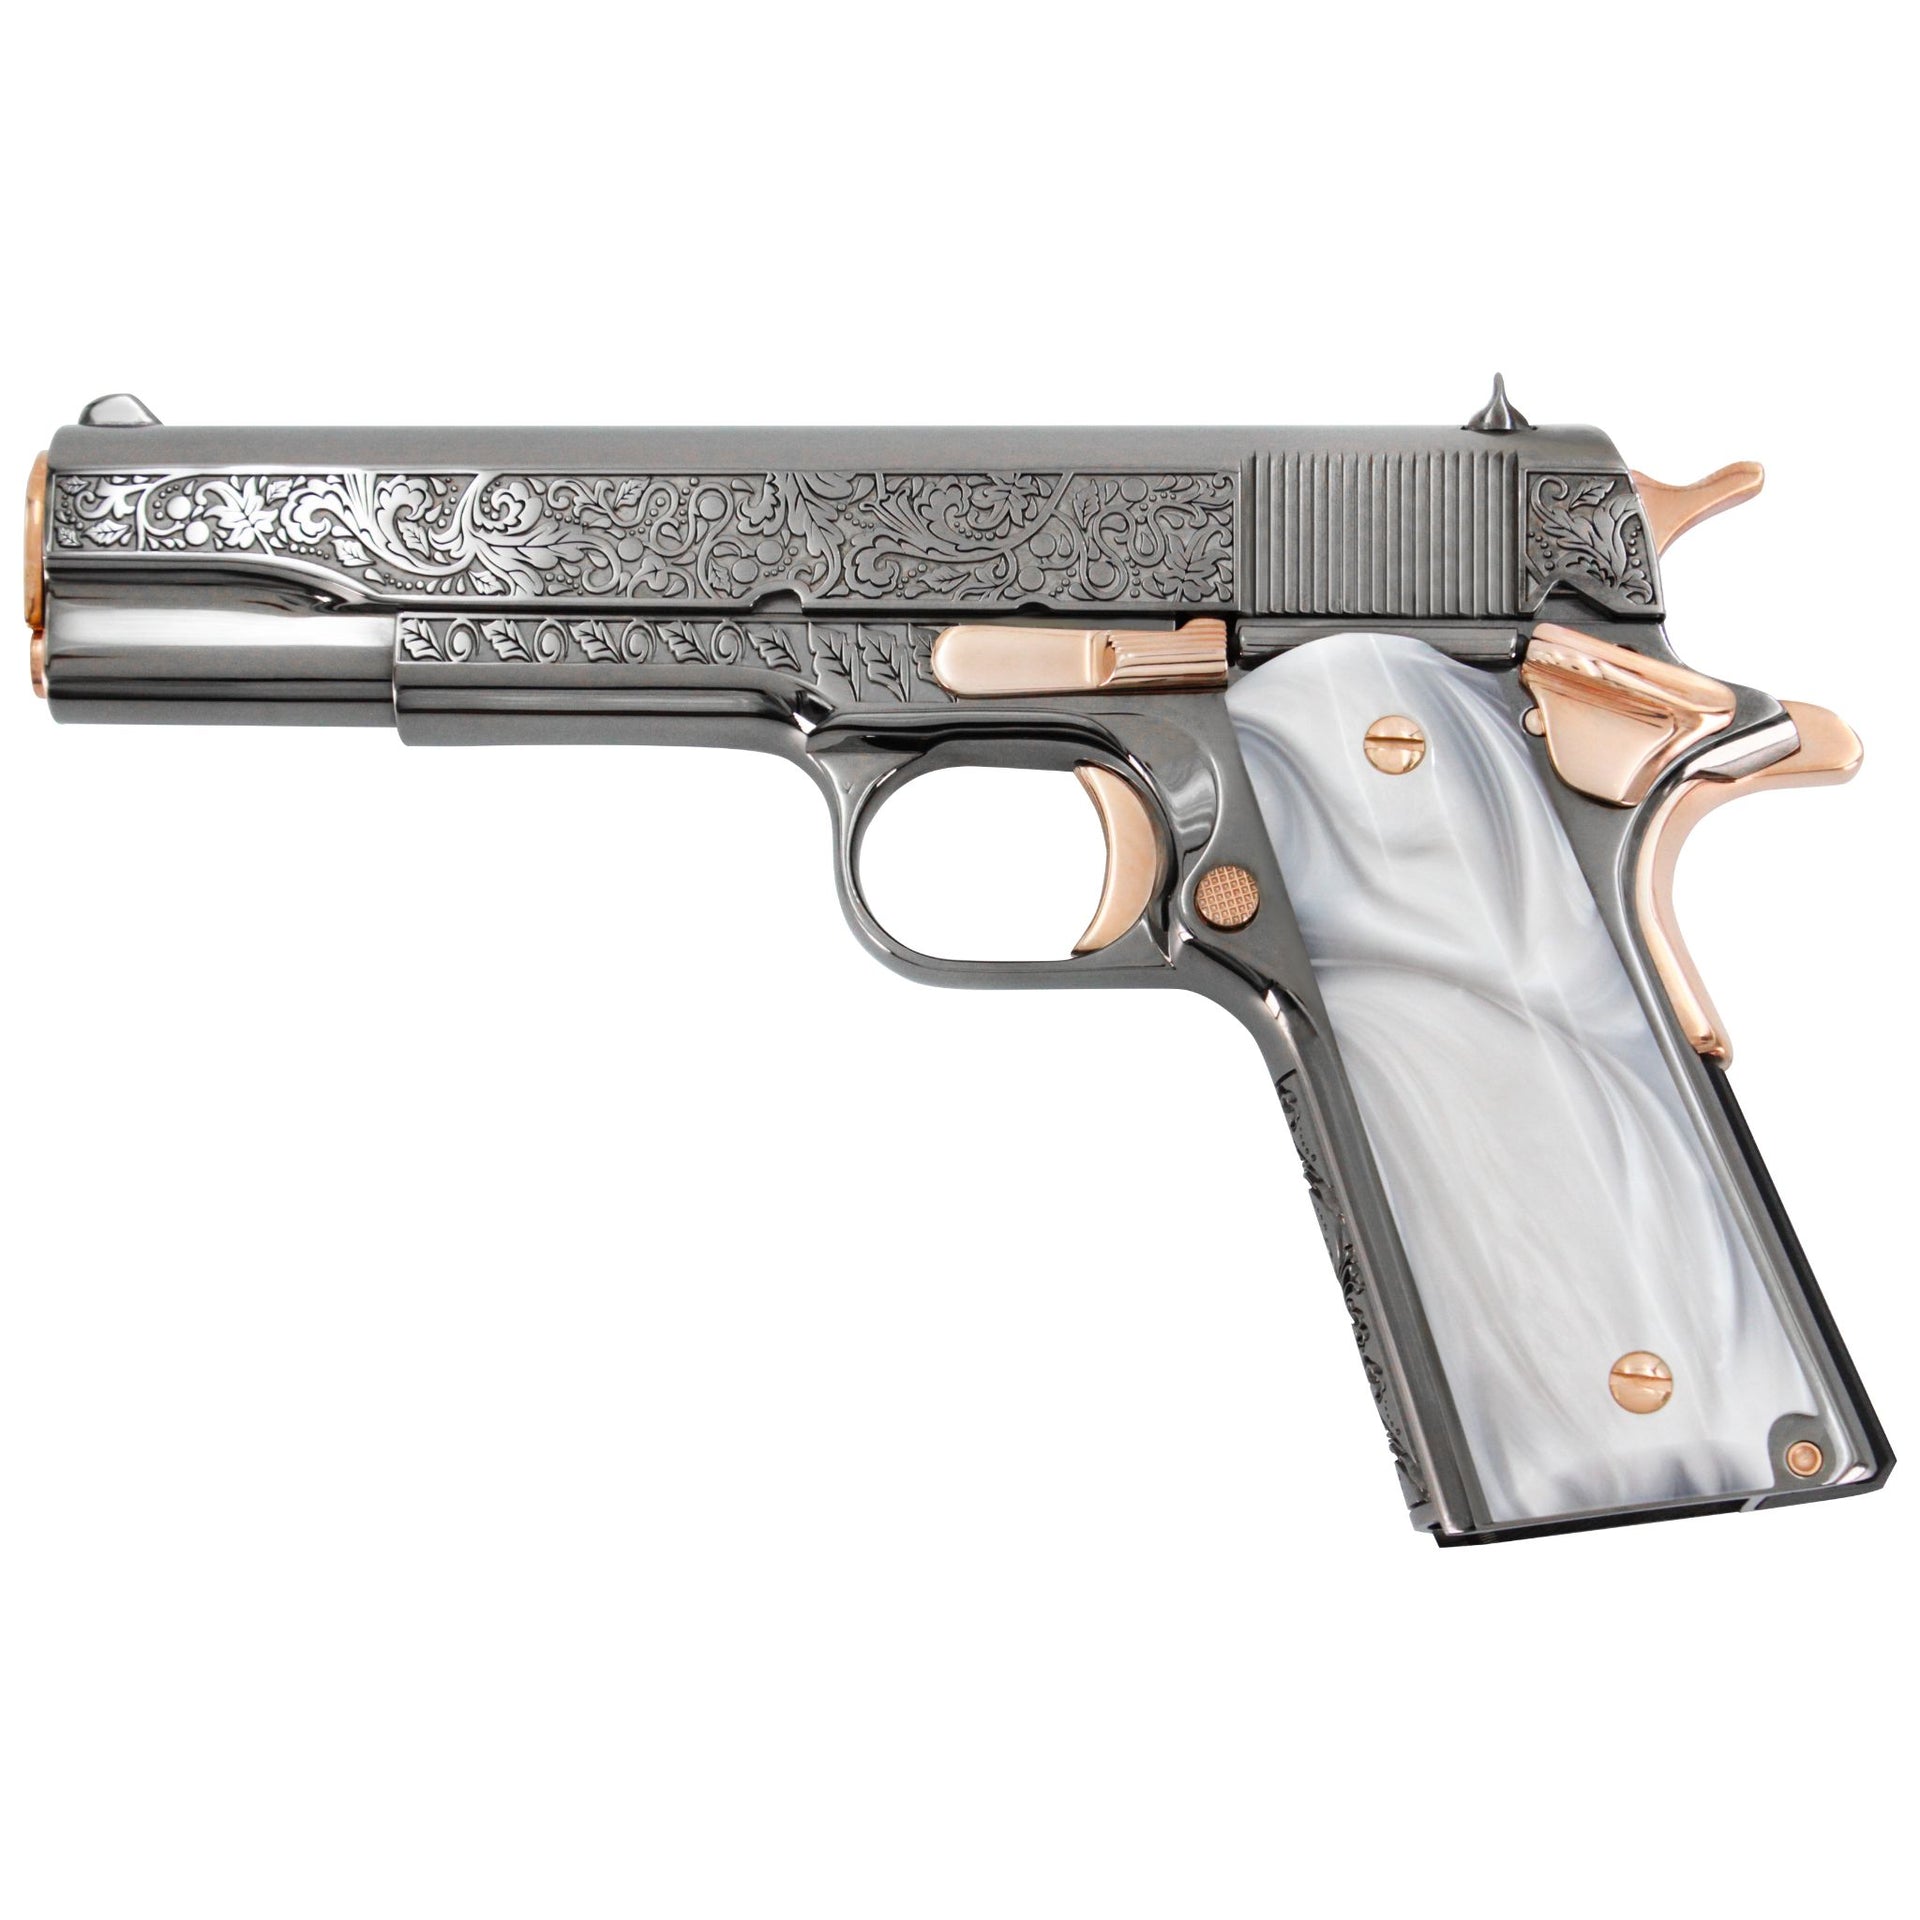 Colt 1911 Government, 45ACP, Vine and Berries Design, Black Chrome Finish With 18K Rose Gold Accents, SKU: 4654517125222, 18K Rose Gold gun, 18K Rose Gold Firearm